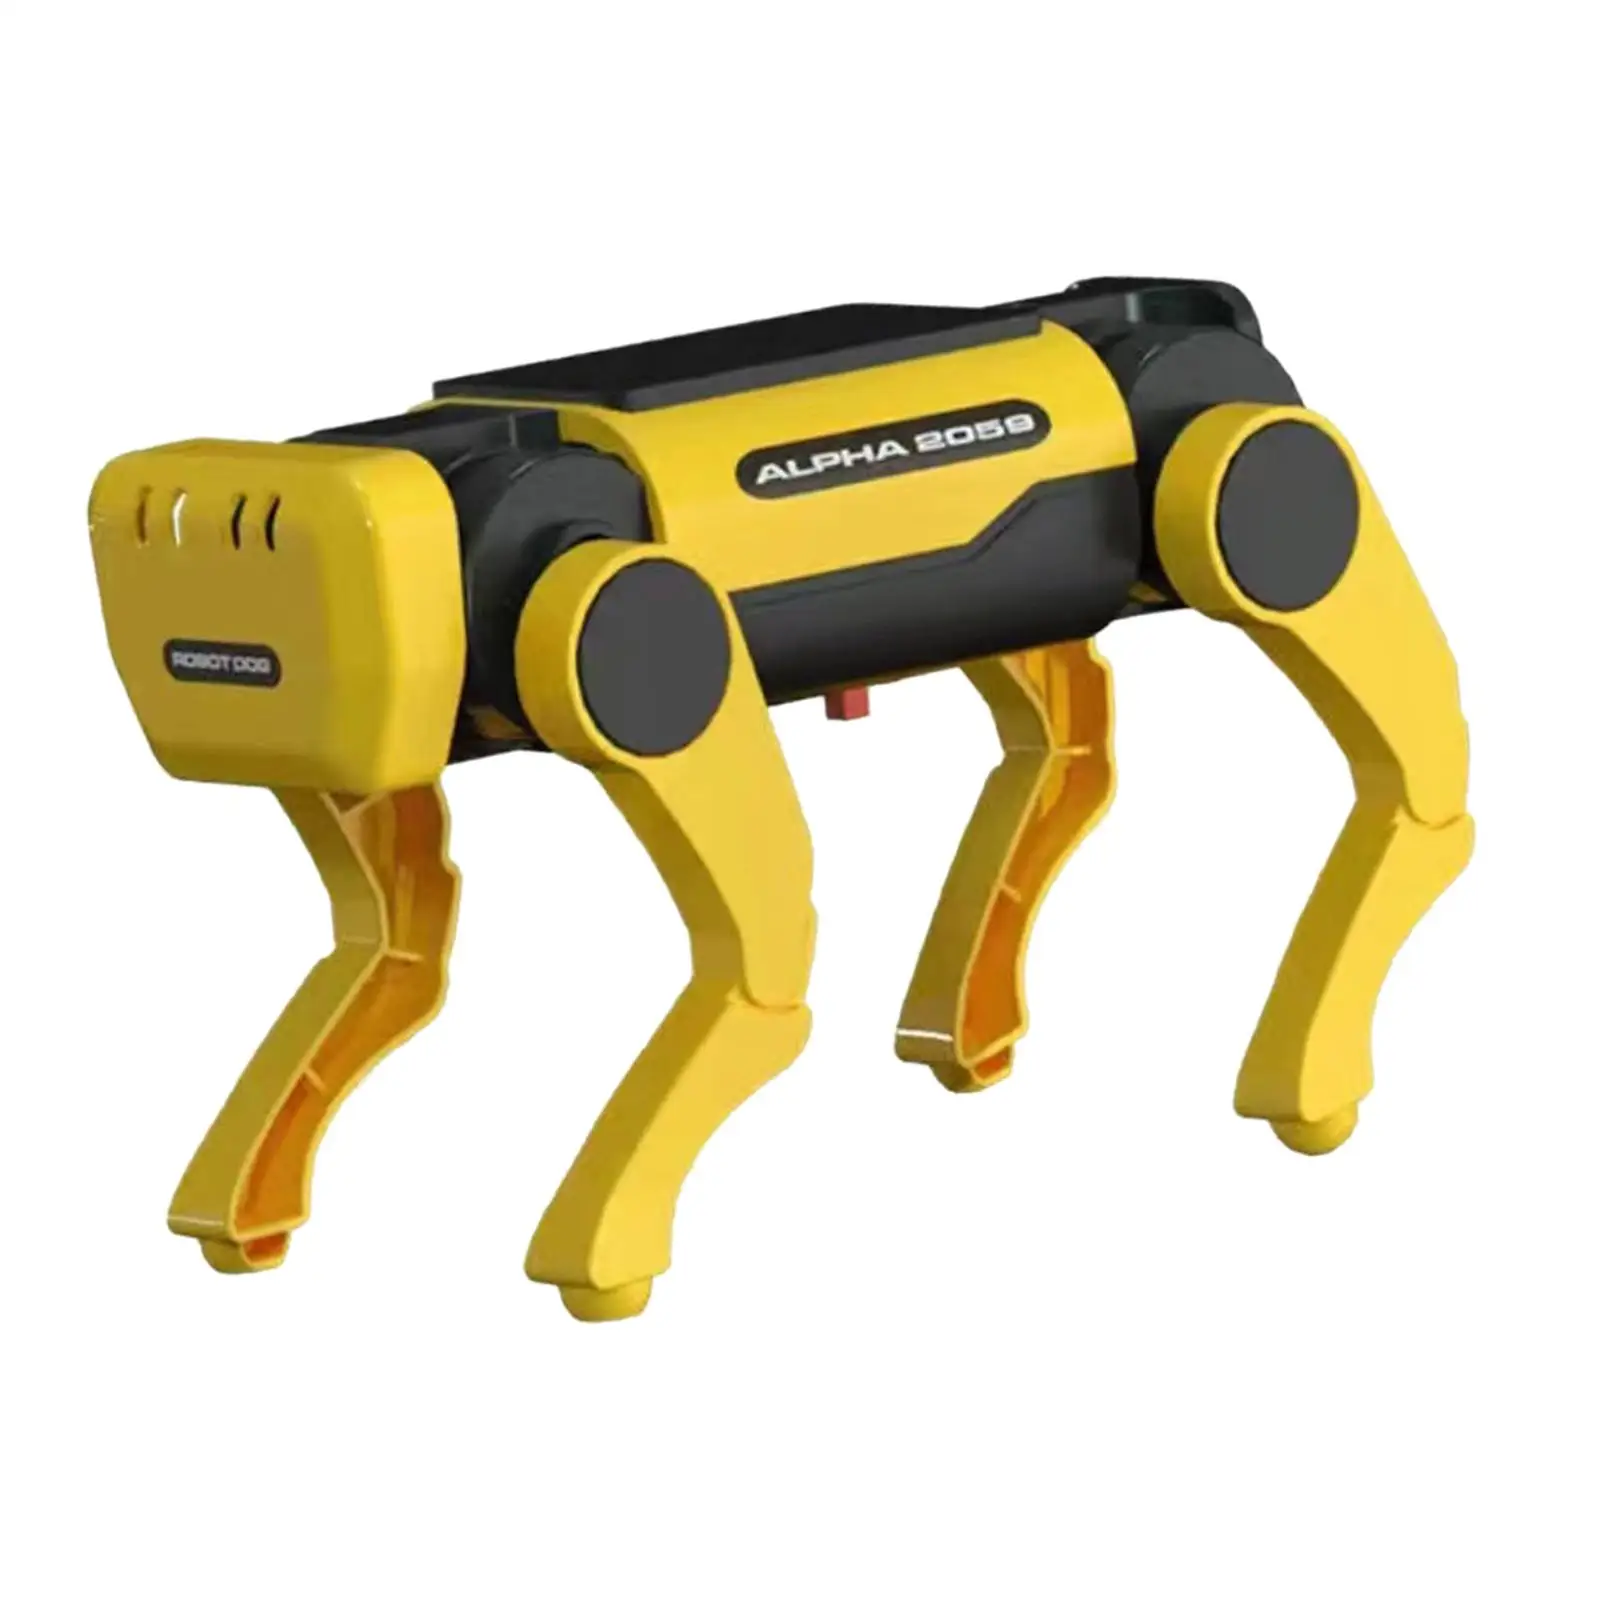 Solar Electric Mechanical Dog 3D Puzzle Assembly Children Educational Toys Robotic Pets for Boys Adults Kids Girls Gifts